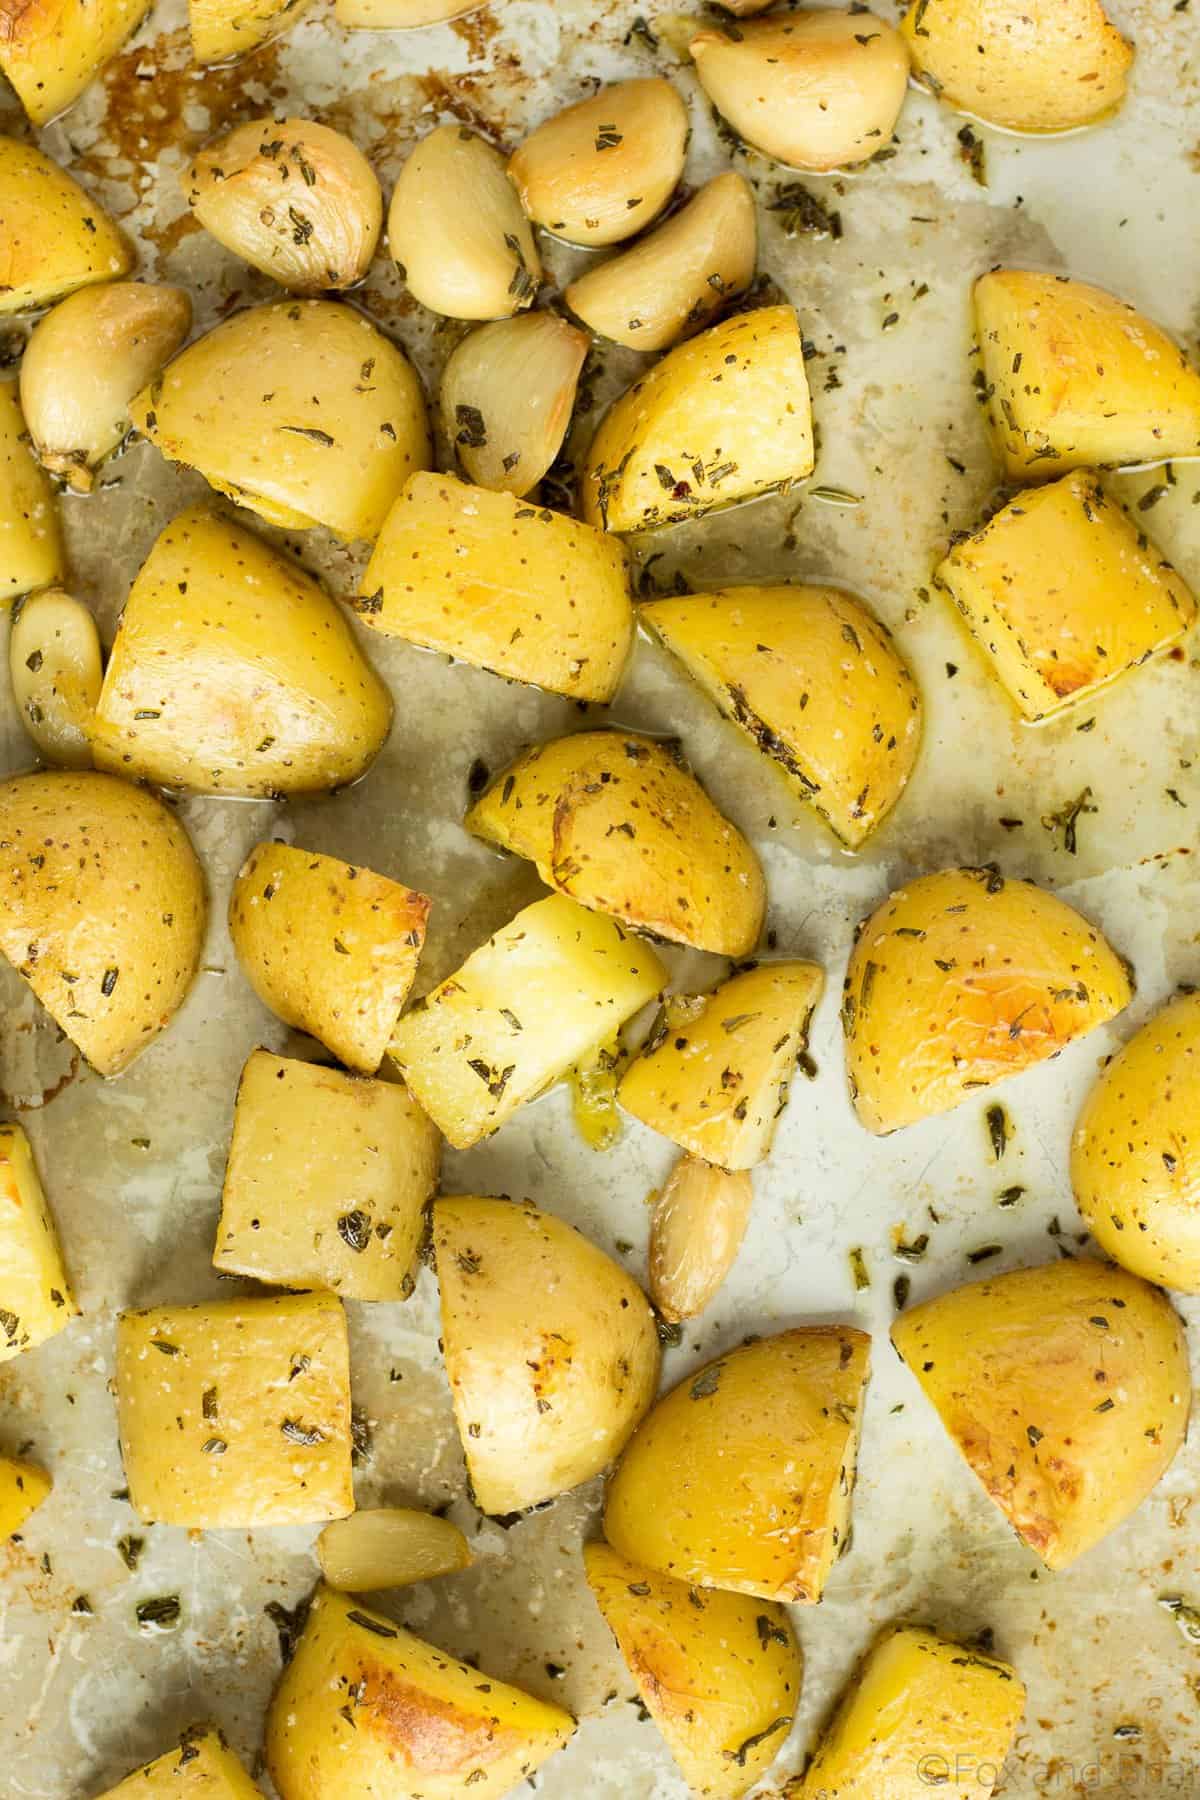 Crispy Roasted Garlic and Rosemary Potatoes. Golden potatoes roasted with garlic and rosemary are your perfect side dish.